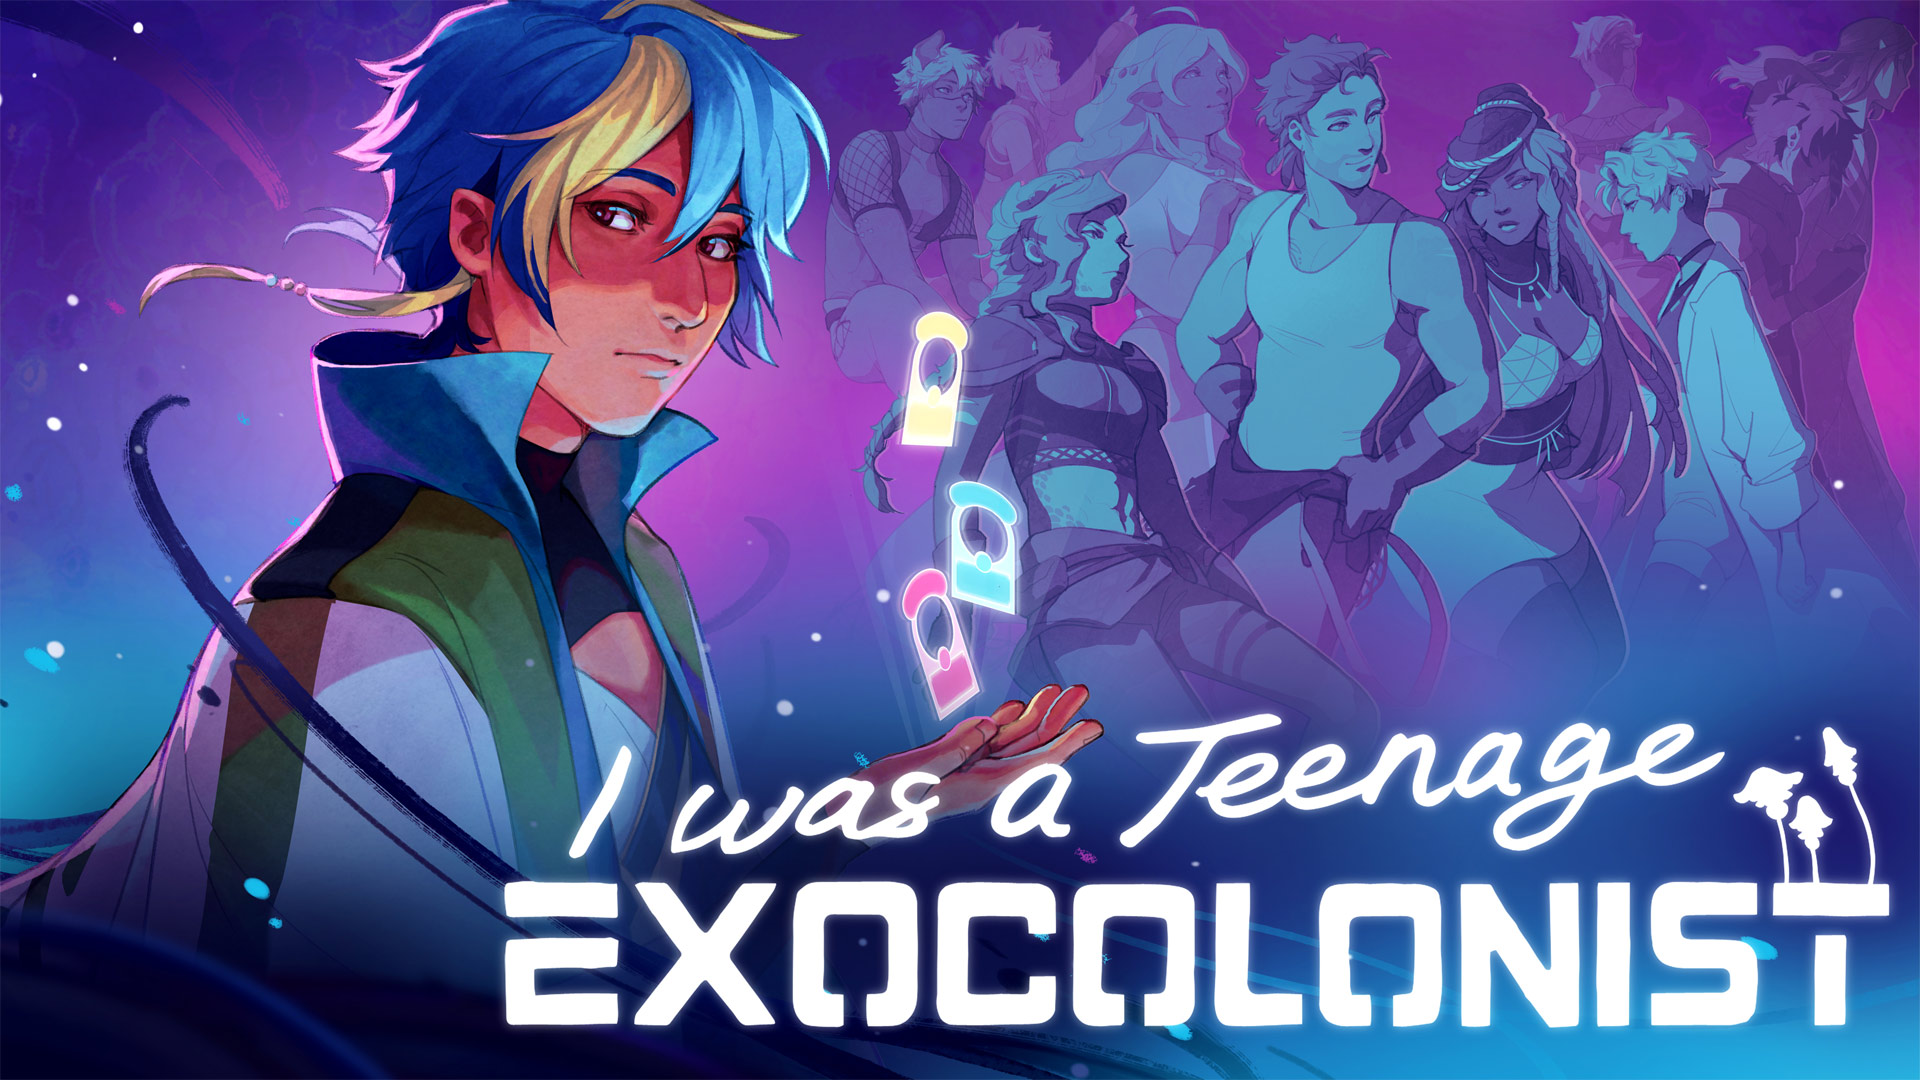 I Was a Teenage Exocolonist for apple download